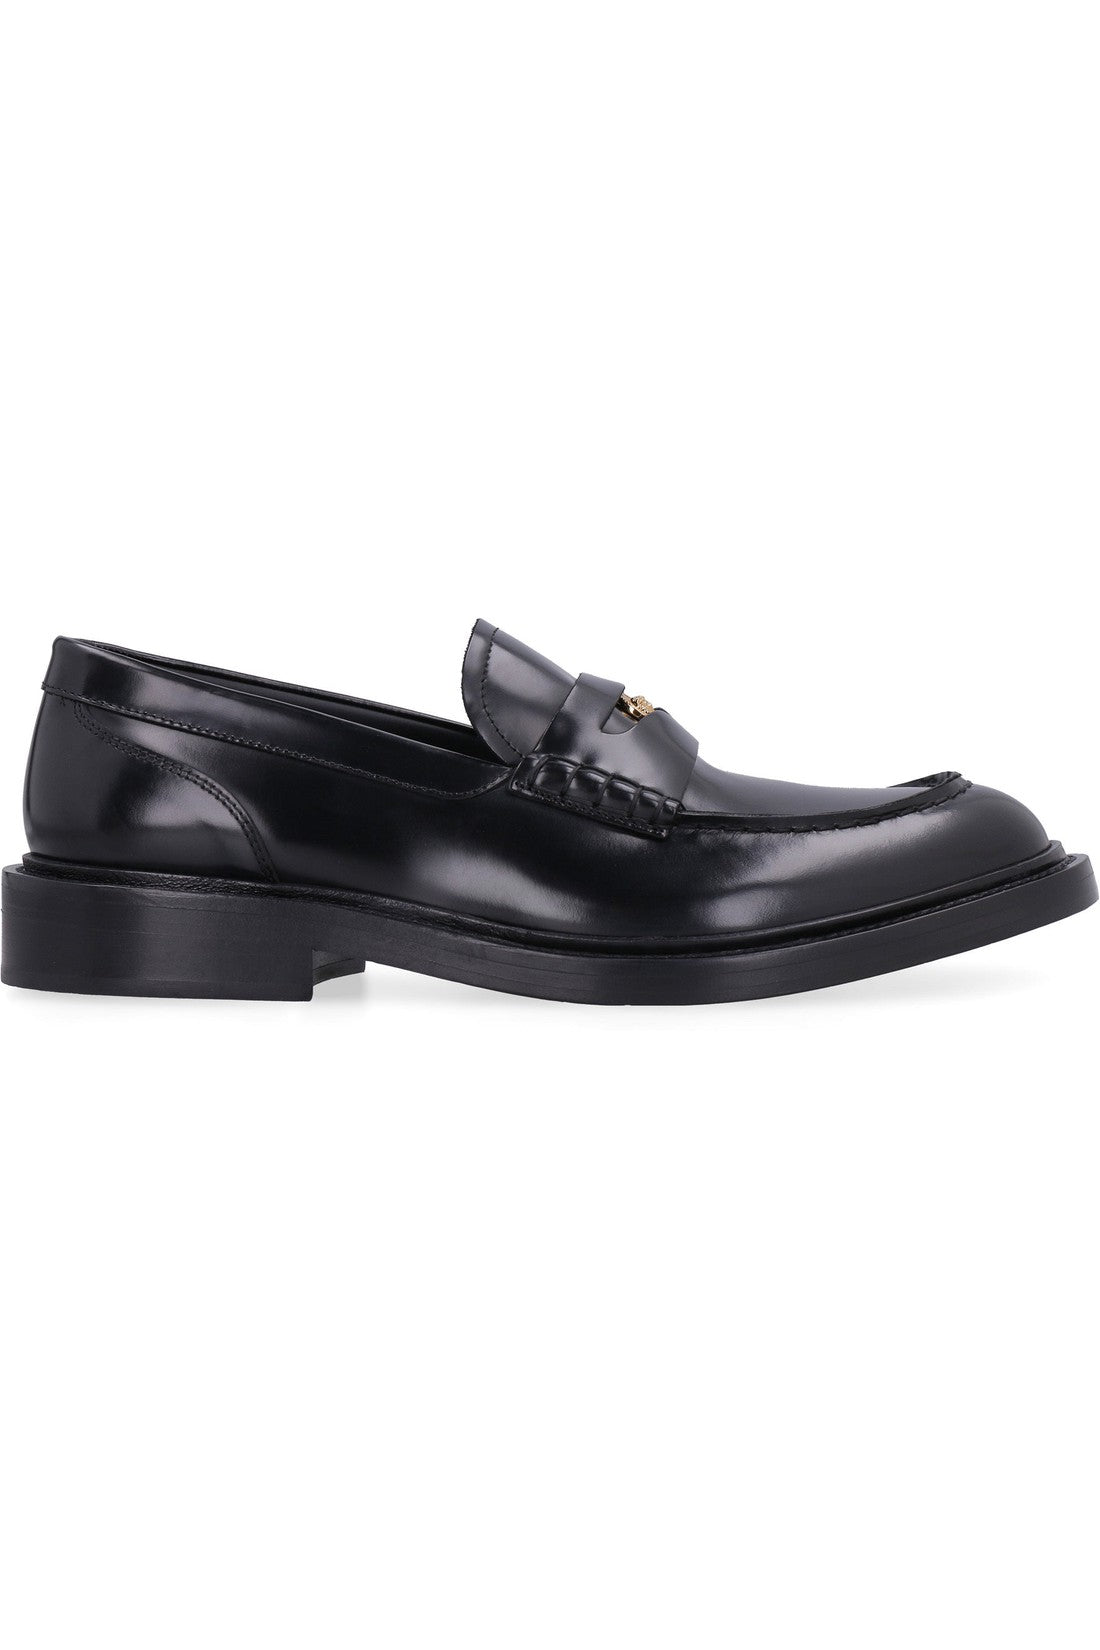 Versace-OUTLET-SALE-Leather loafers-ARCHIVIST